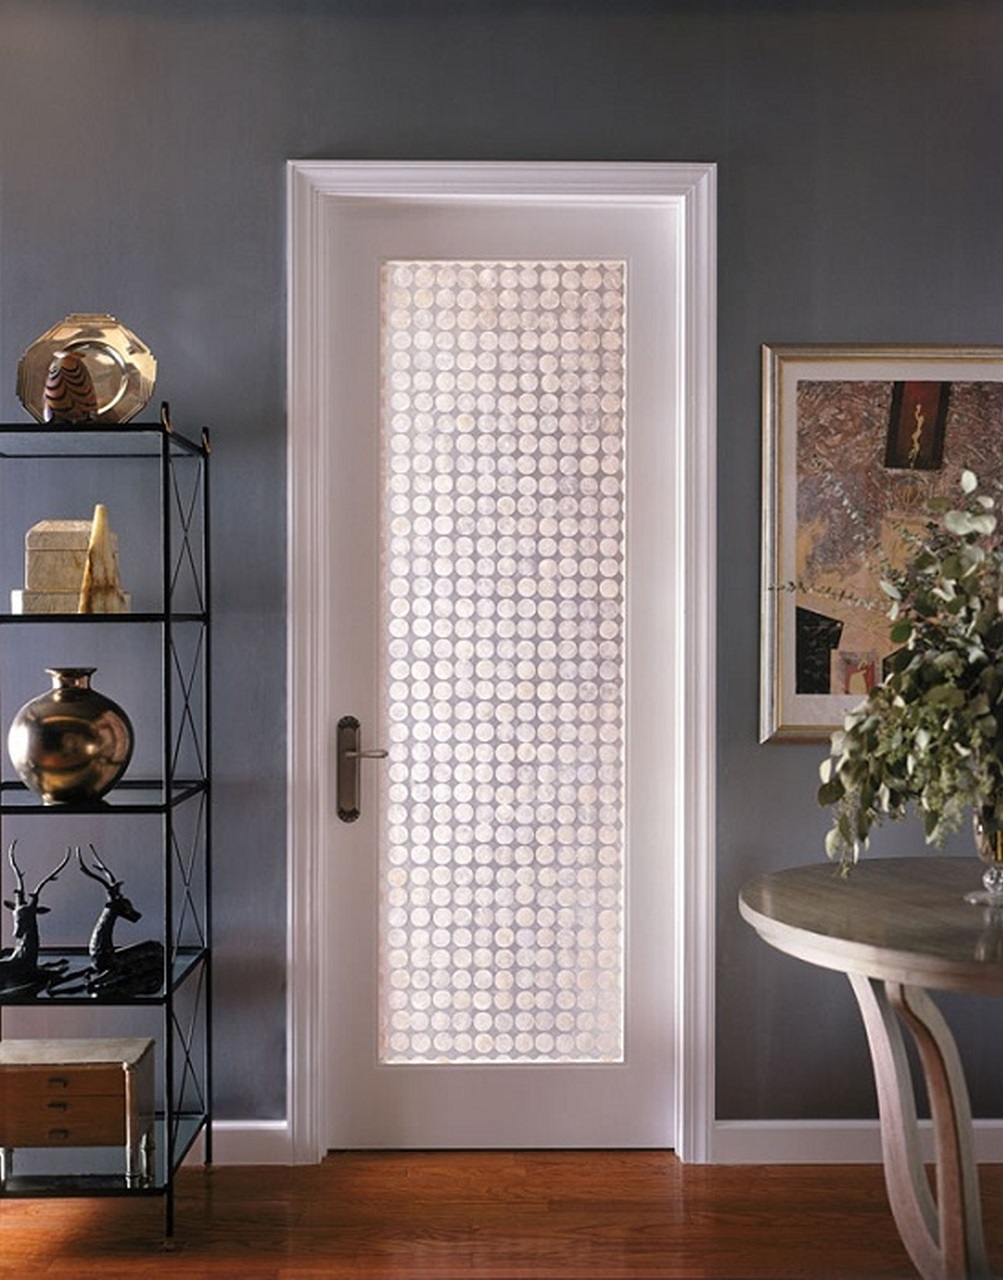 29 Samples Of Interior Doors With Frosted Glass - Interior Design ...